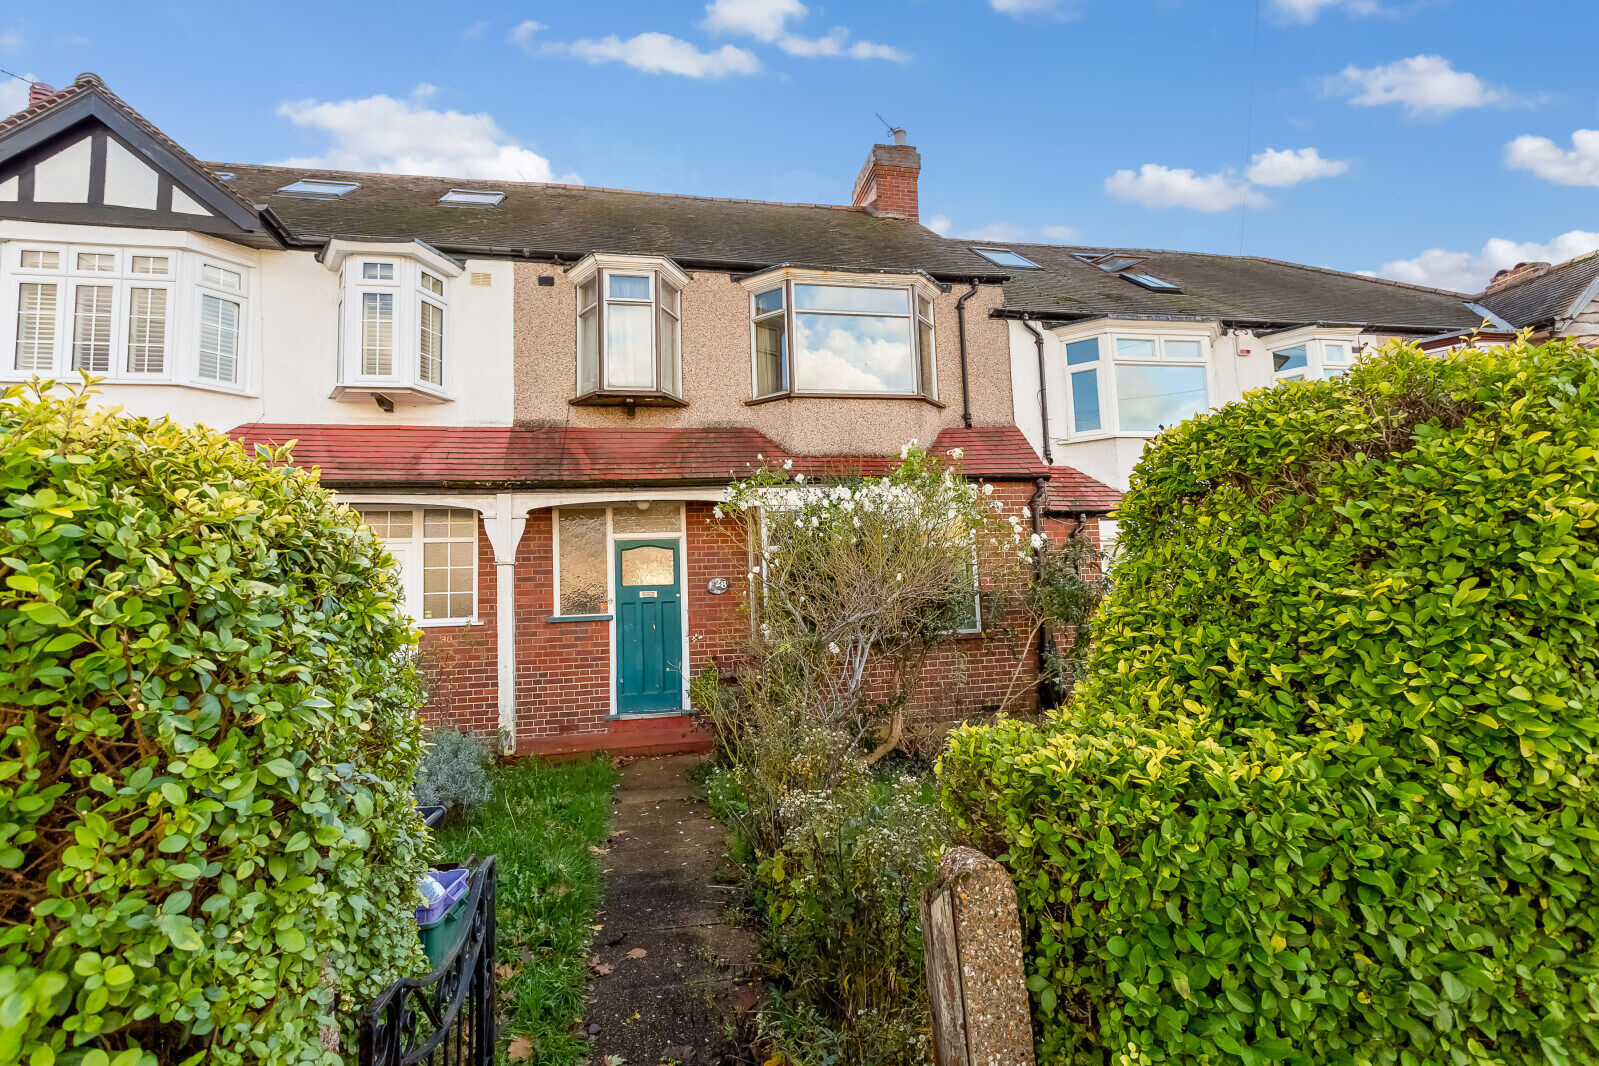 3 bedroom mid terraced house for sale Eastway, Morden, SM4, main image